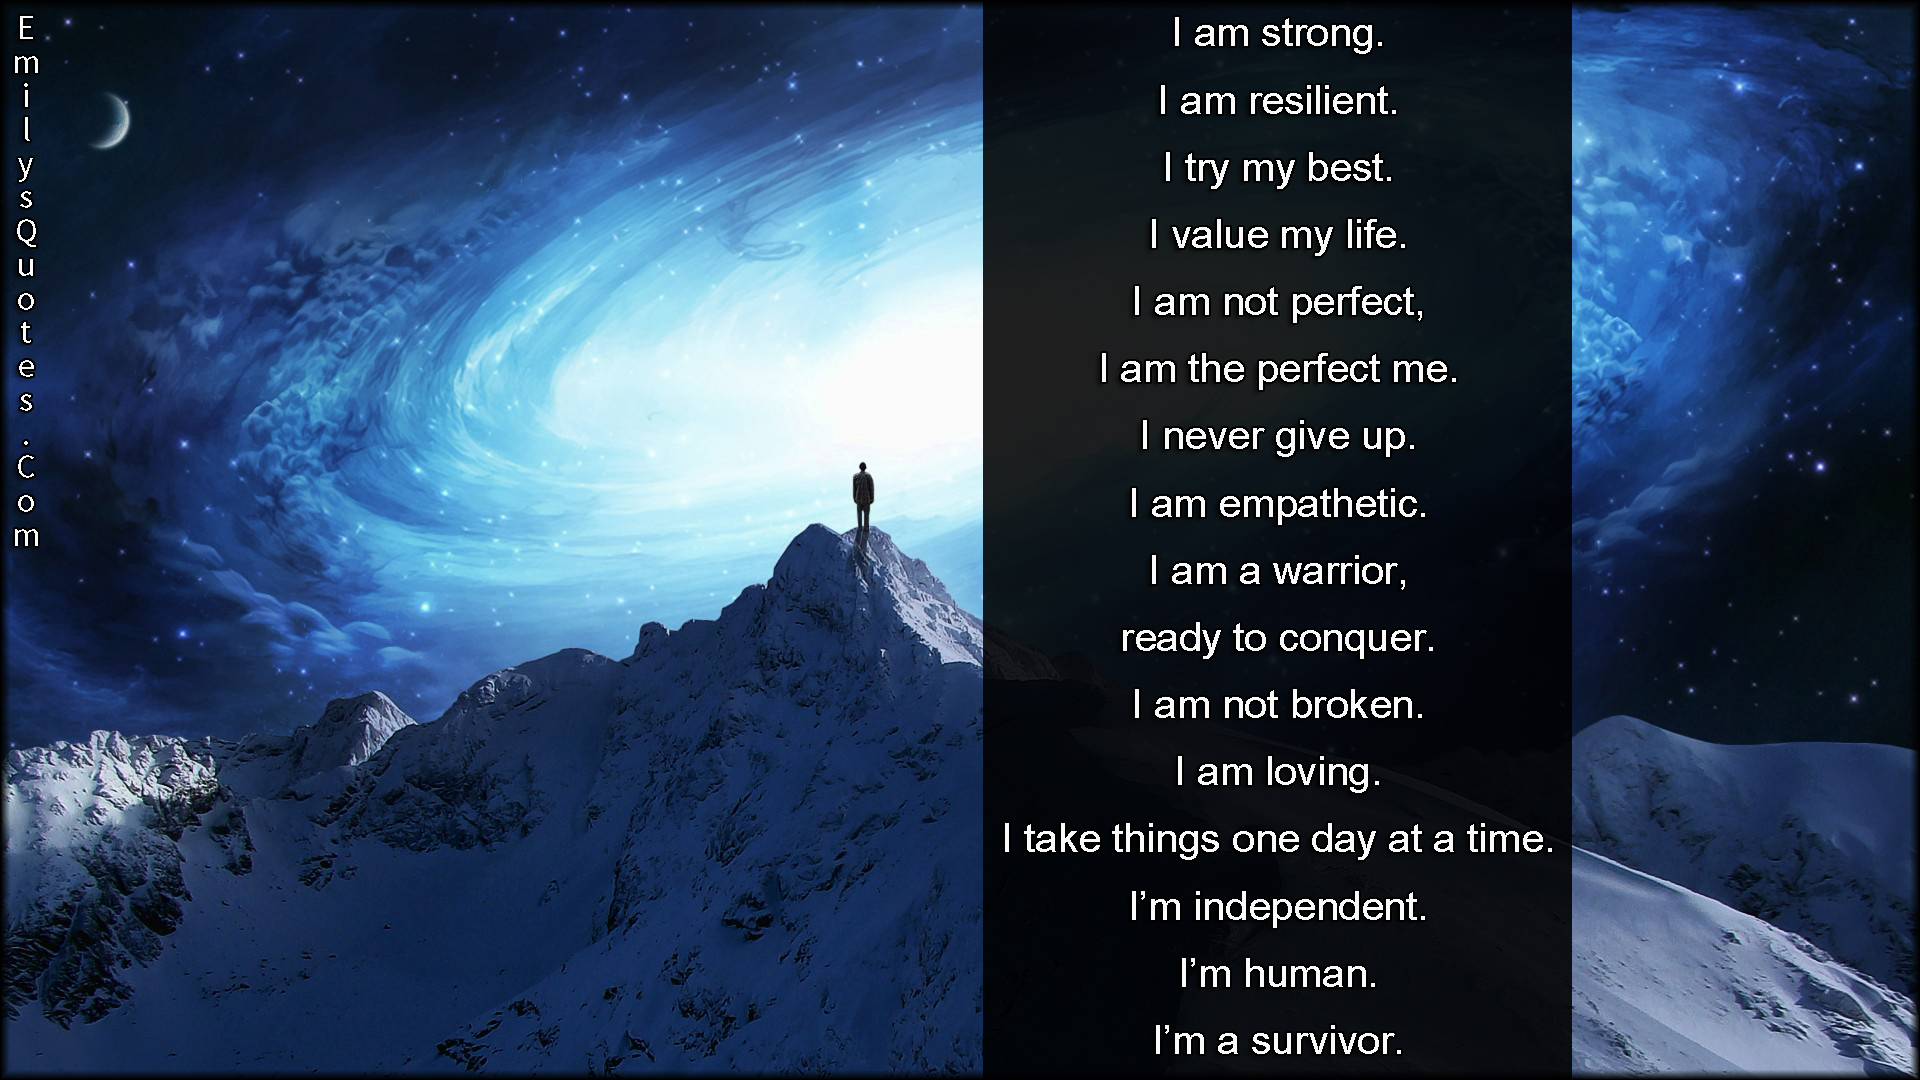 I am strong. I am resilient. I try my best. I value my life. I am not perfect, I am the perfect me. I never give up. I am empathetic. I am a warrior, ready to conquer. I am not broken. I am loving. I take things one day at a time. I’m independent. I’m human. I’m a survivor